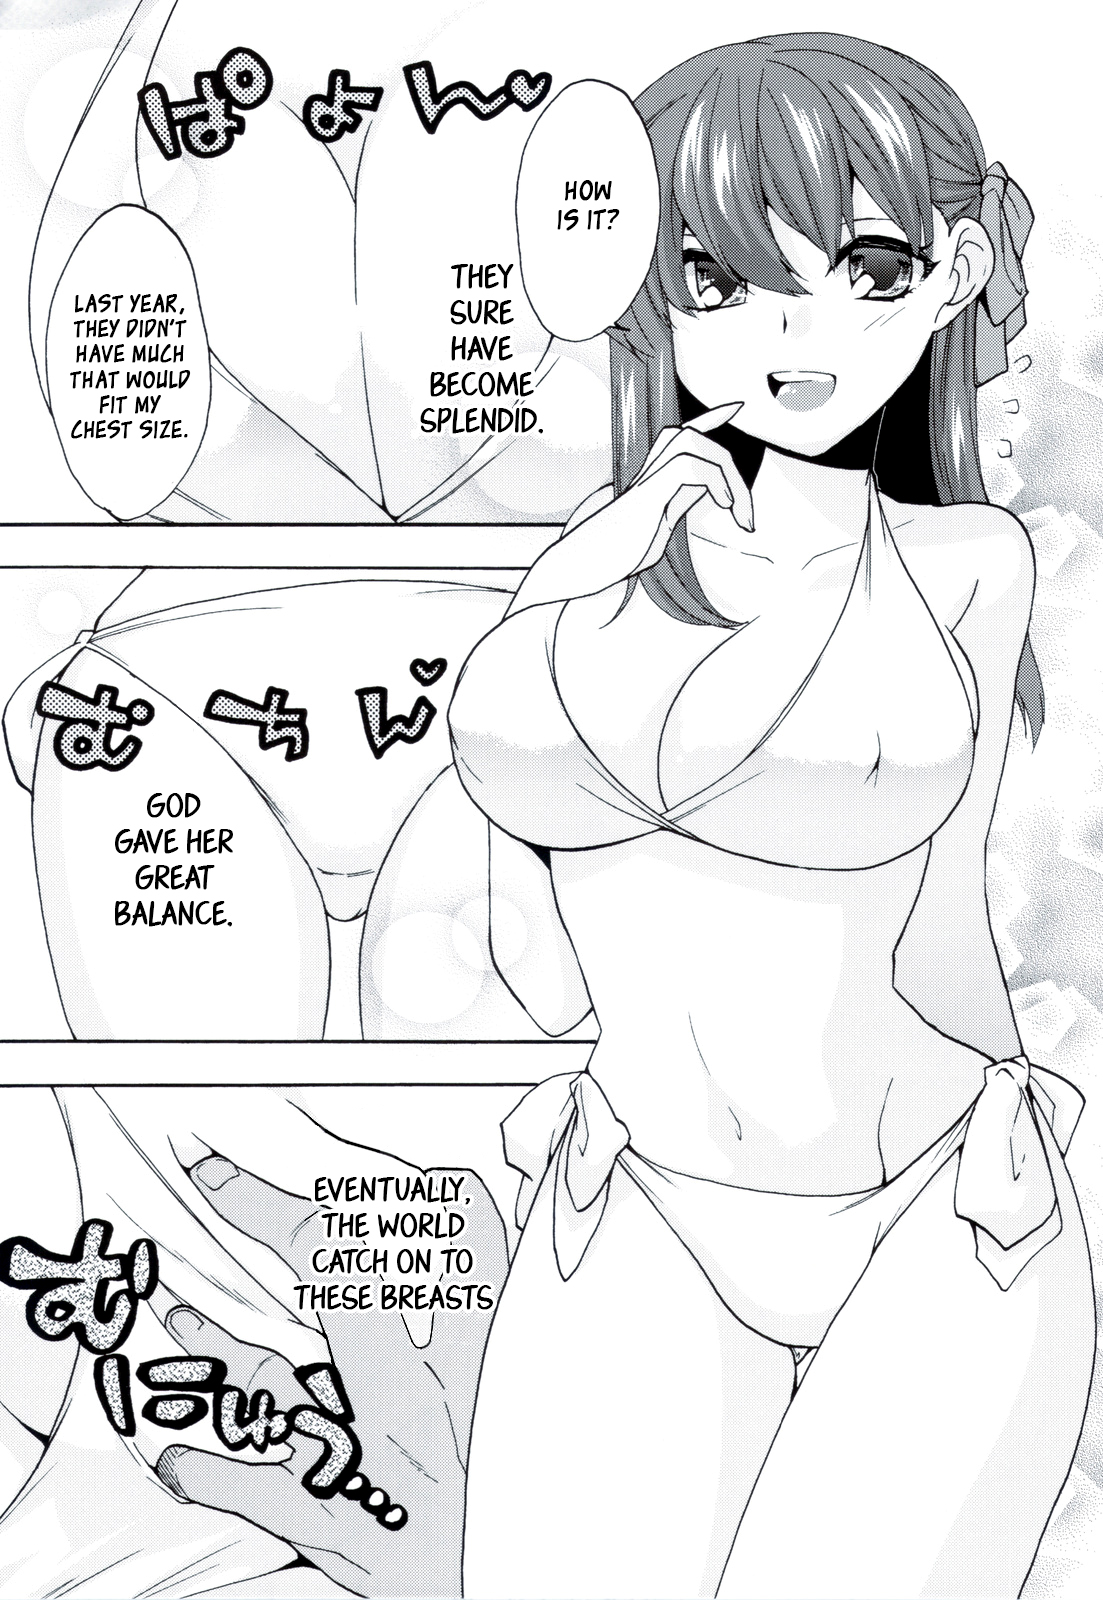 (CT20) [TRIP SPIDER (niwacho)] CareLessLy (Fate/stay night) [English] [Oppai Dreams] page 4 full